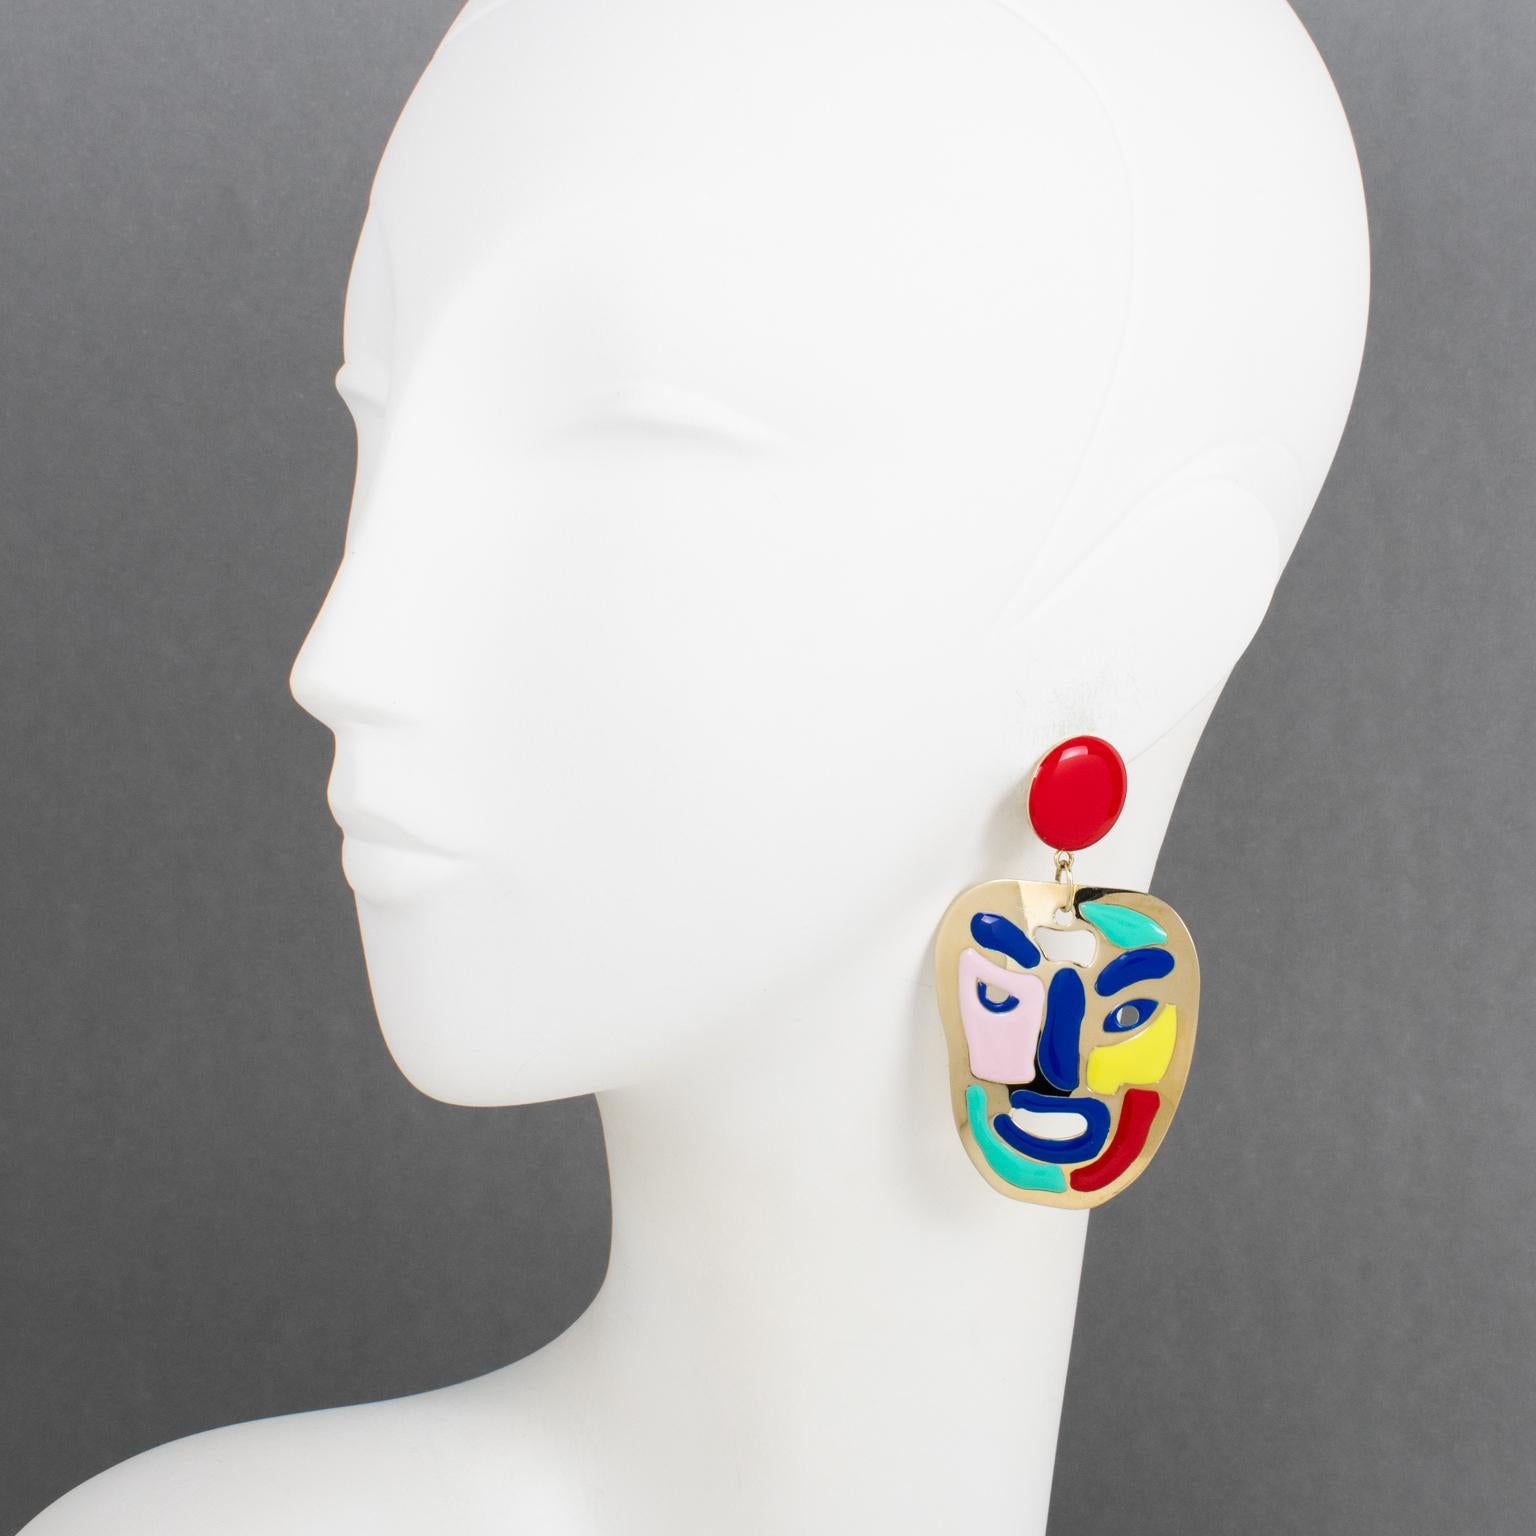 These are rare iconic Missoni, Italy couture clip-on earrings. Italian designer Rosita Missoni designed this iconic pattern in the 1980s, and these earrings were part of a 2000s design revival. They are adorned with playful smiling faces. The pieces